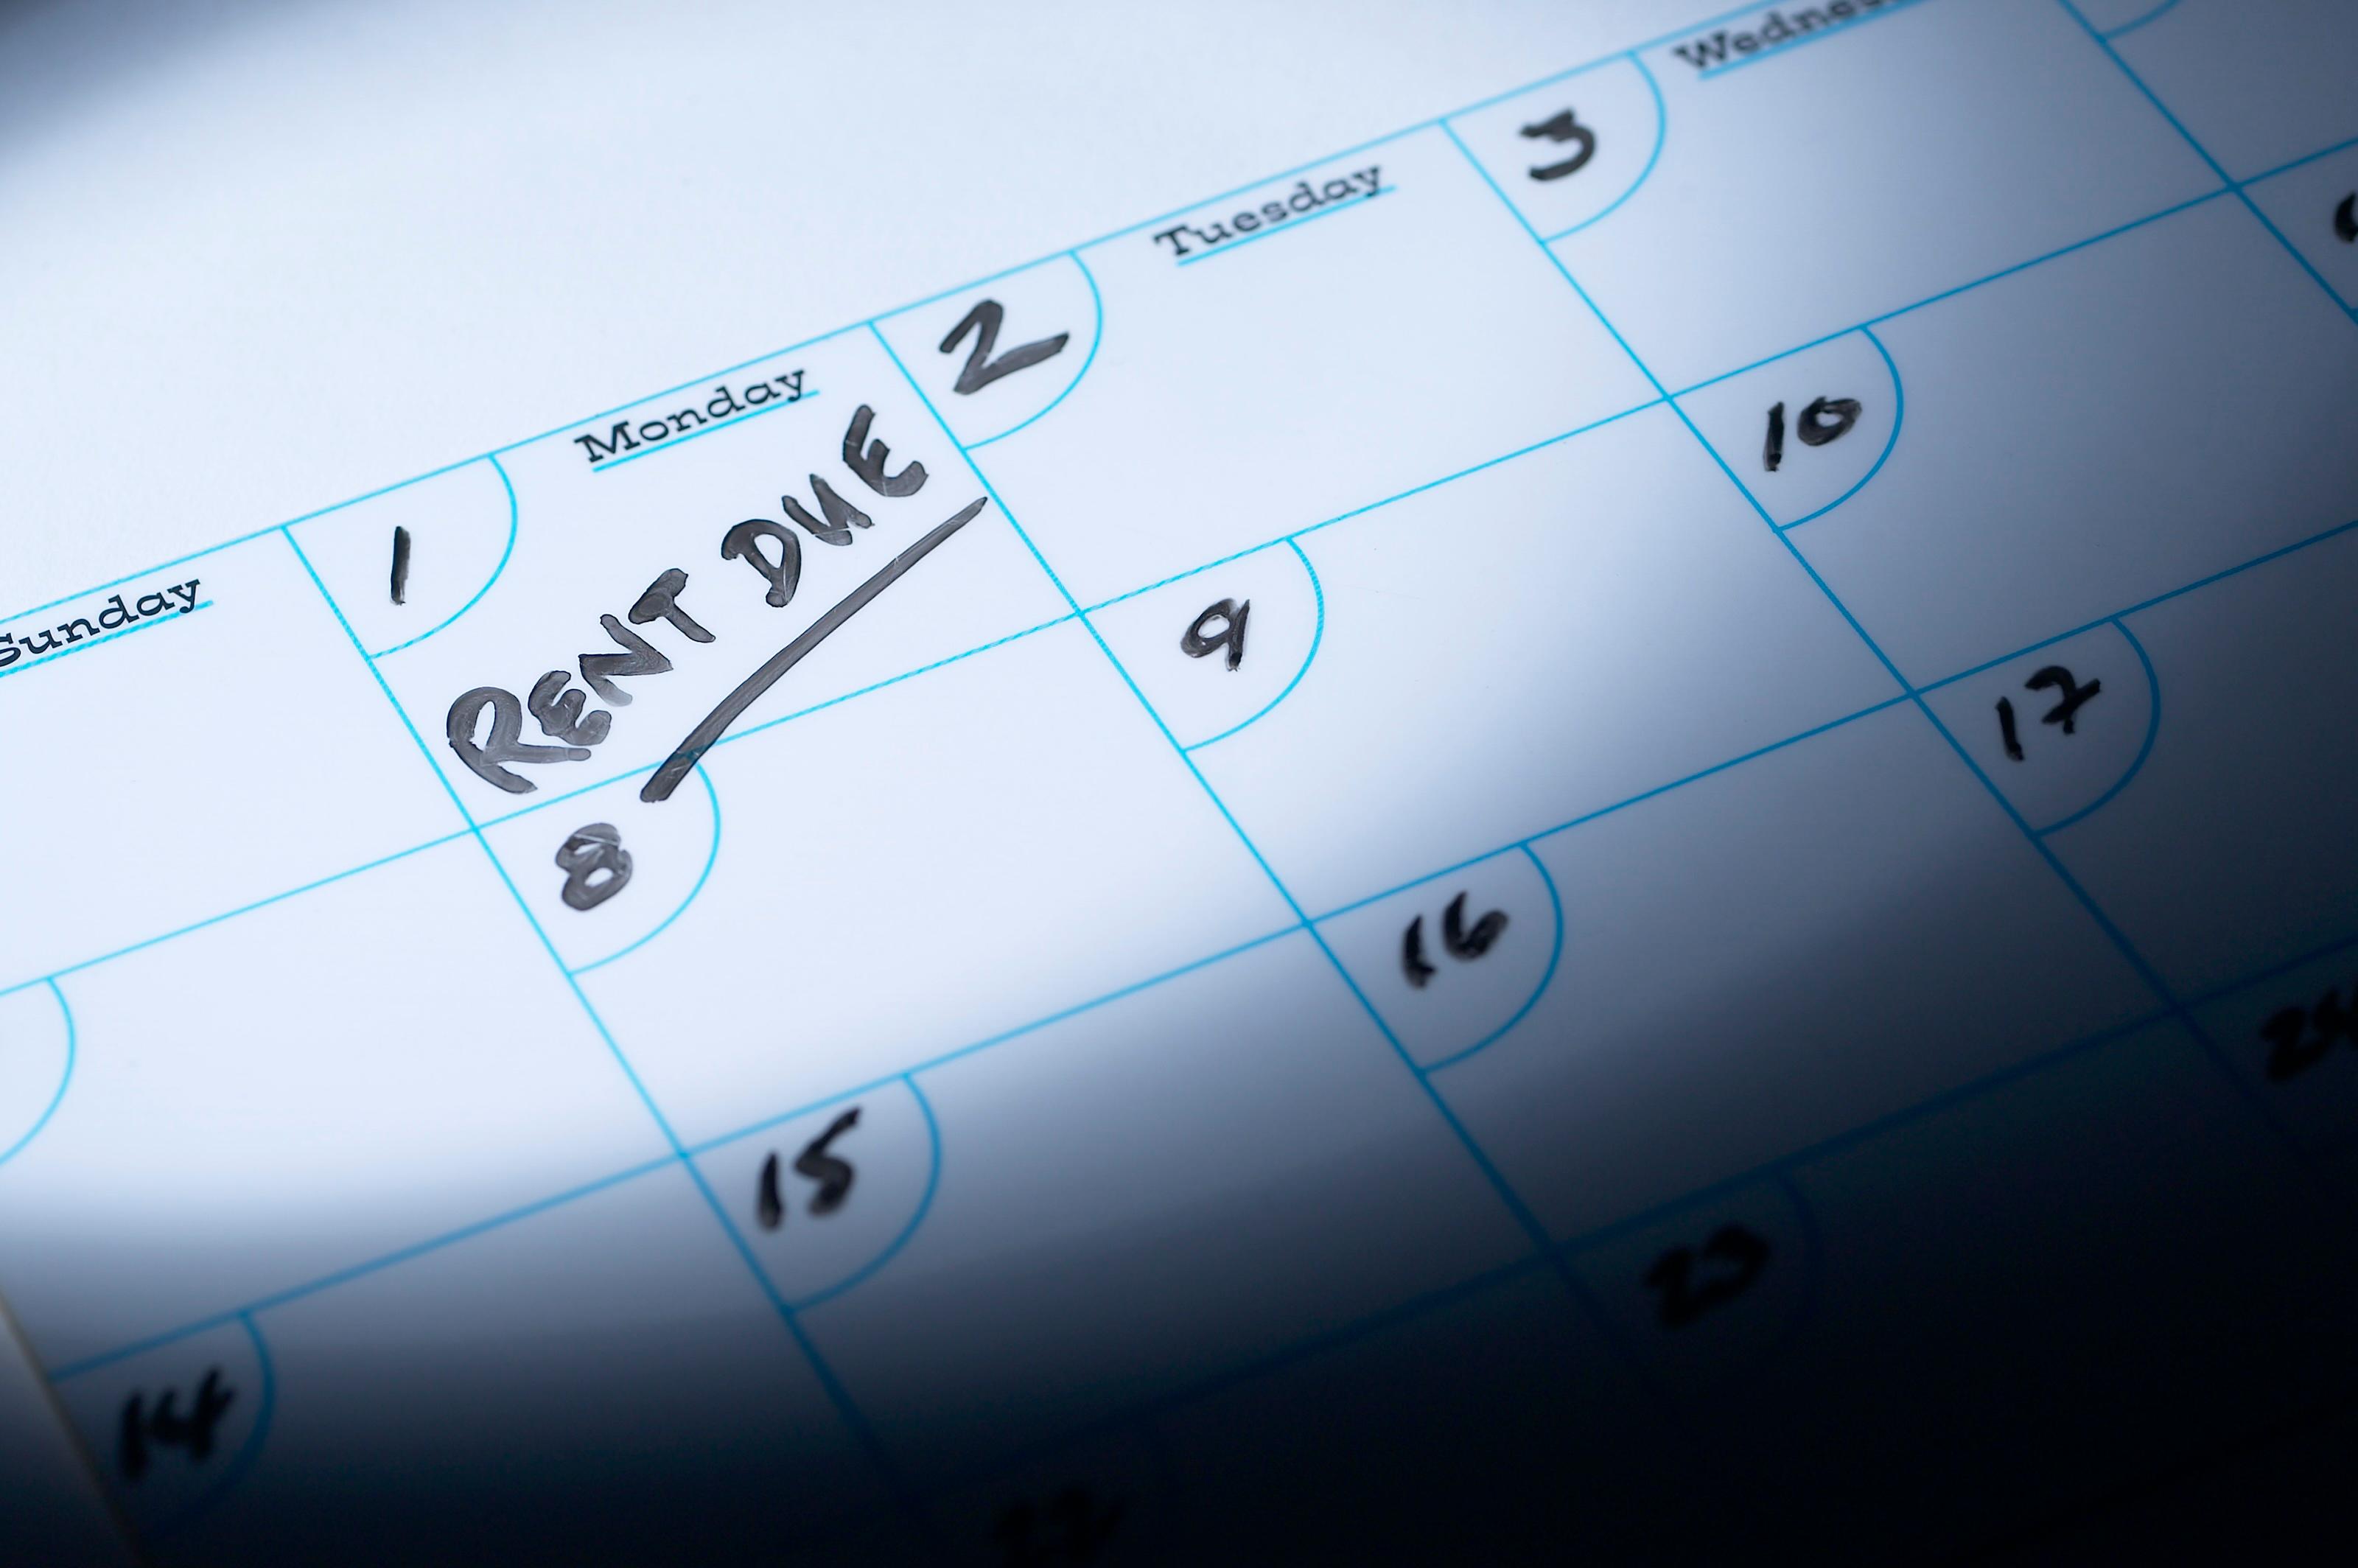 rent due date marked on calendar 